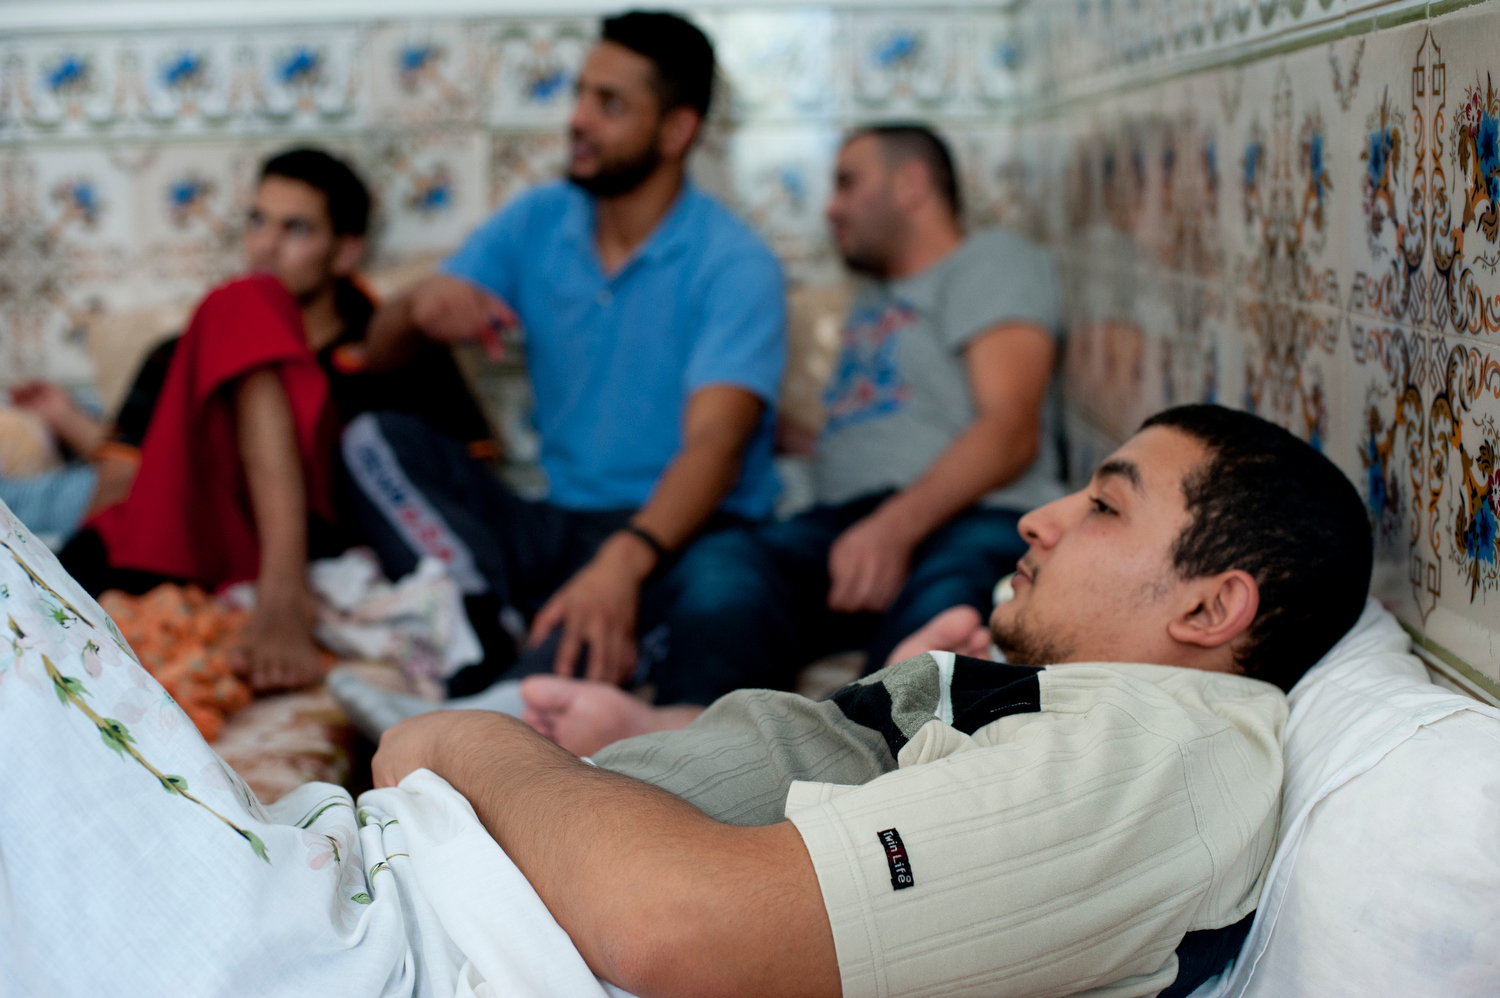  Marwan Baaoueni (center front) in conversation with Marzouki. Wounded during the revolution, this group of young men and women started a hunger strike to incite the interim government to uphold their agreement to pay their medical expenses 